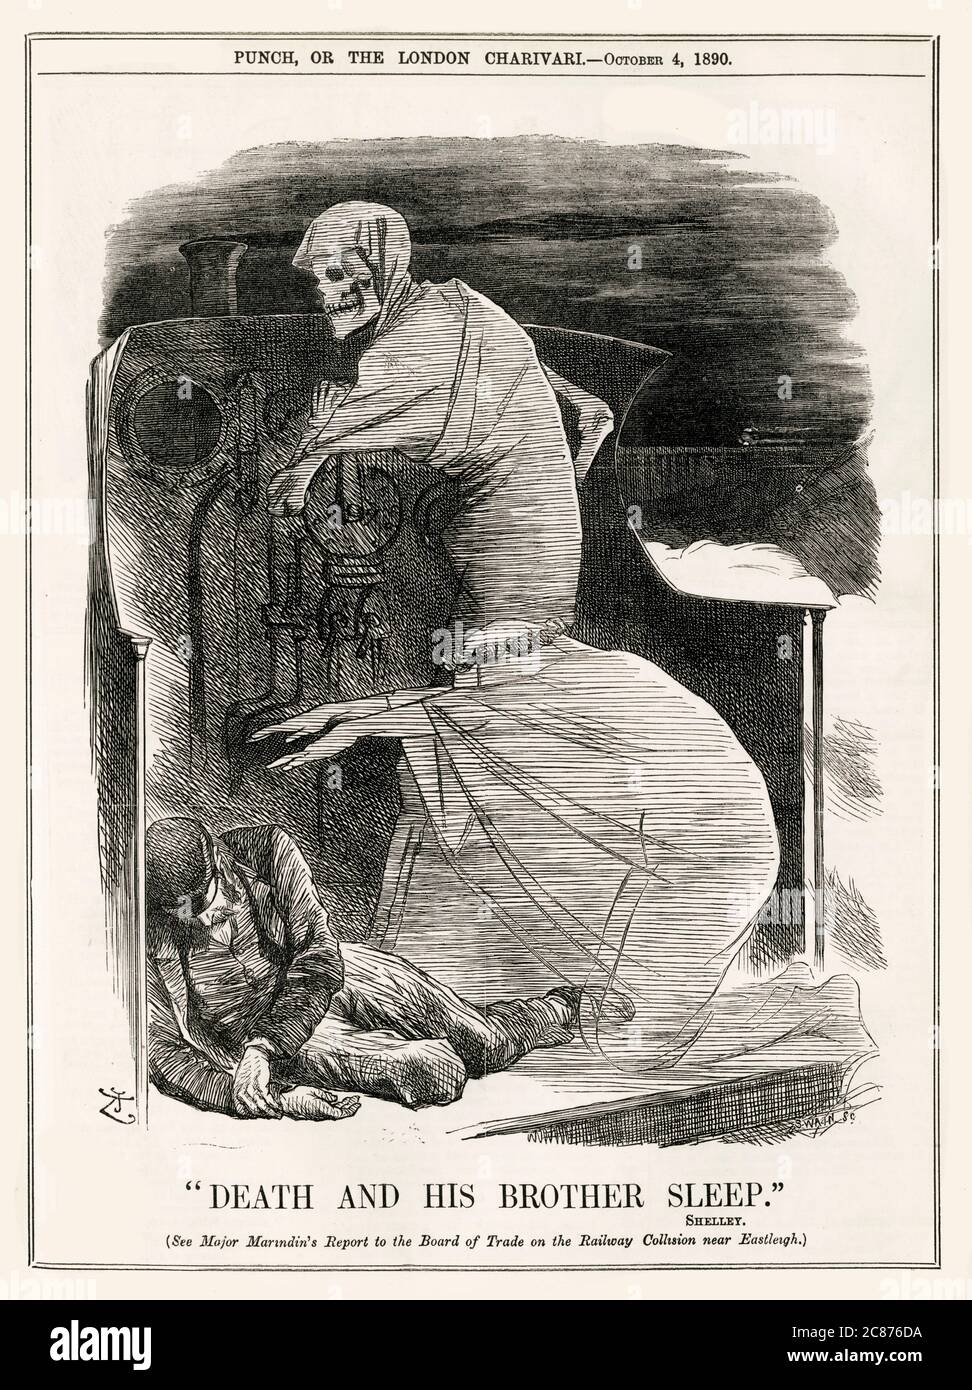 Death and His Brother Sleep, Shelley.  (See Major Marindin's Report to the board of Trade on the Railway Collision near Eastleigh). A ghostly, shrouded figure haunts a collapsed train driver, while death drives the train. Stock Photo